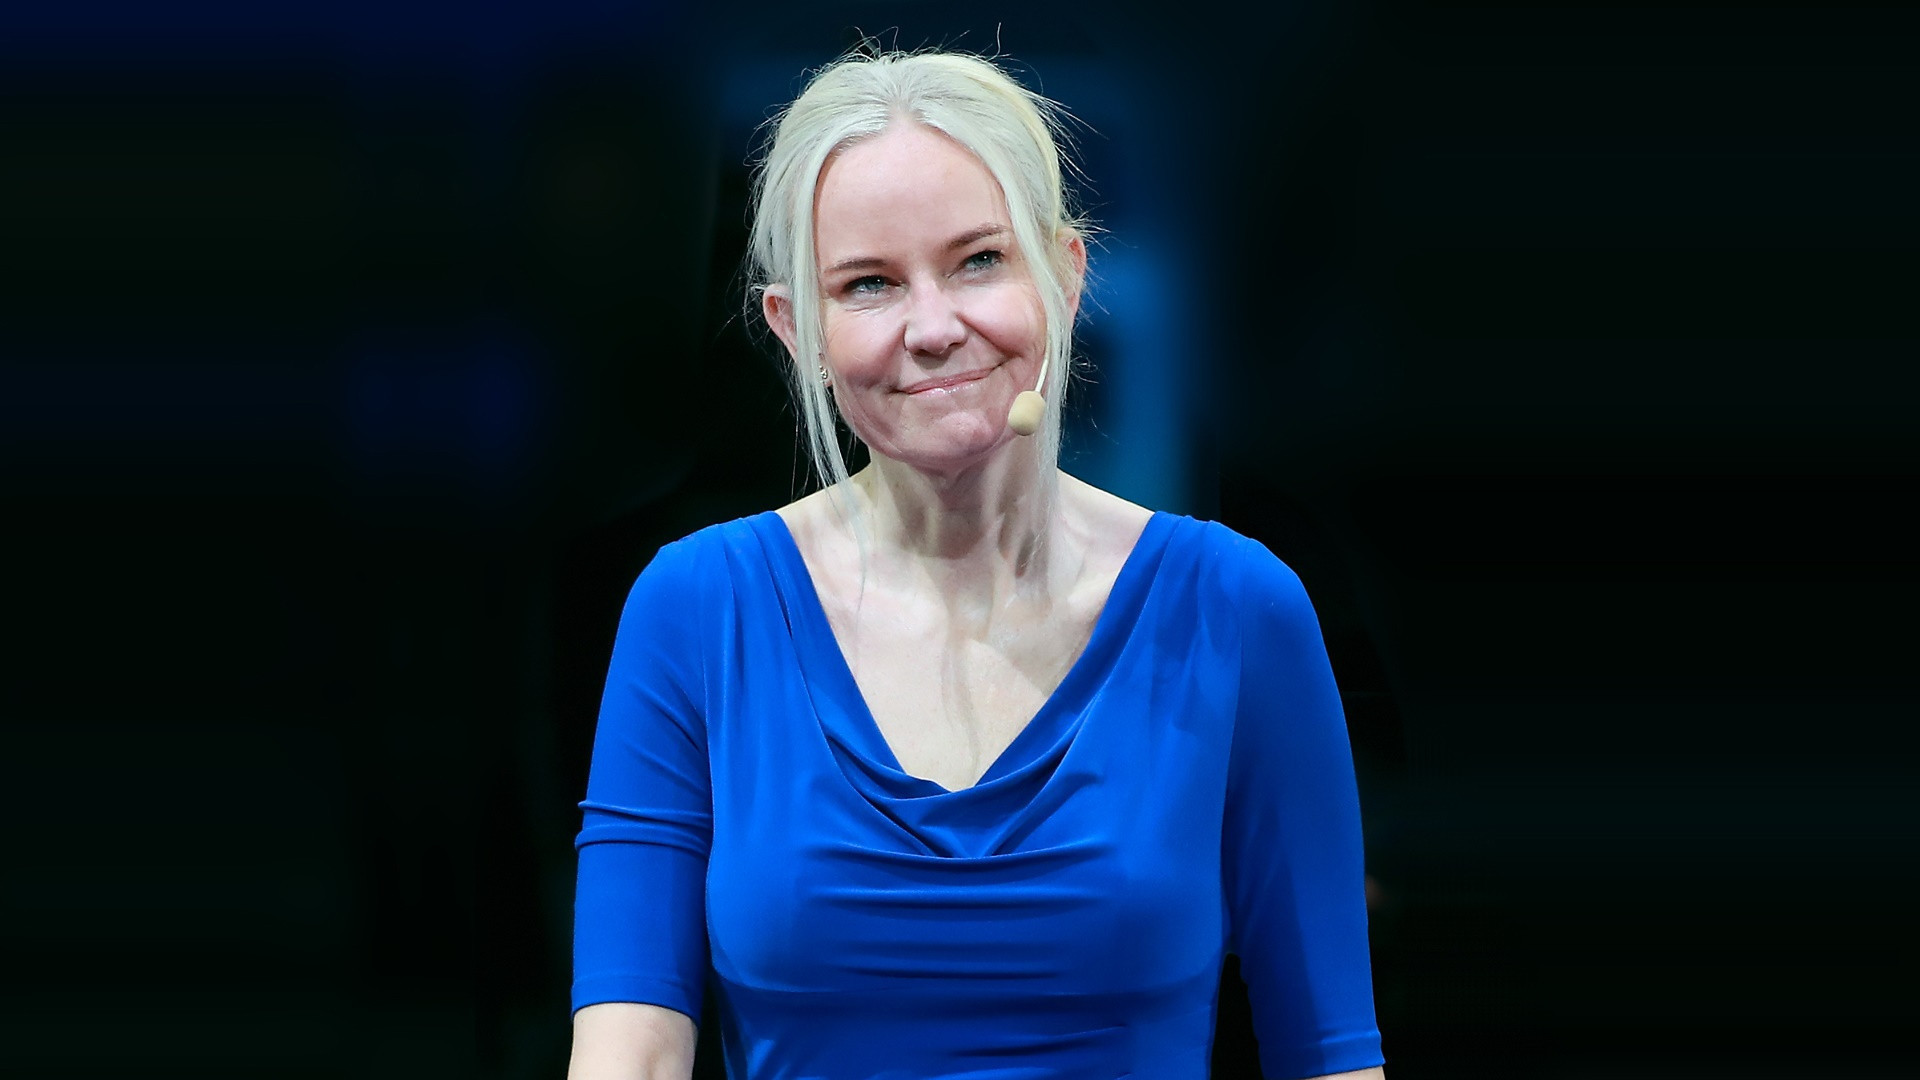 Petra Sörling was elected as the head of the International Table Tennis Federation in November last year but ASOIF wants to see more women in prominent positions at IFs ©Getty Images